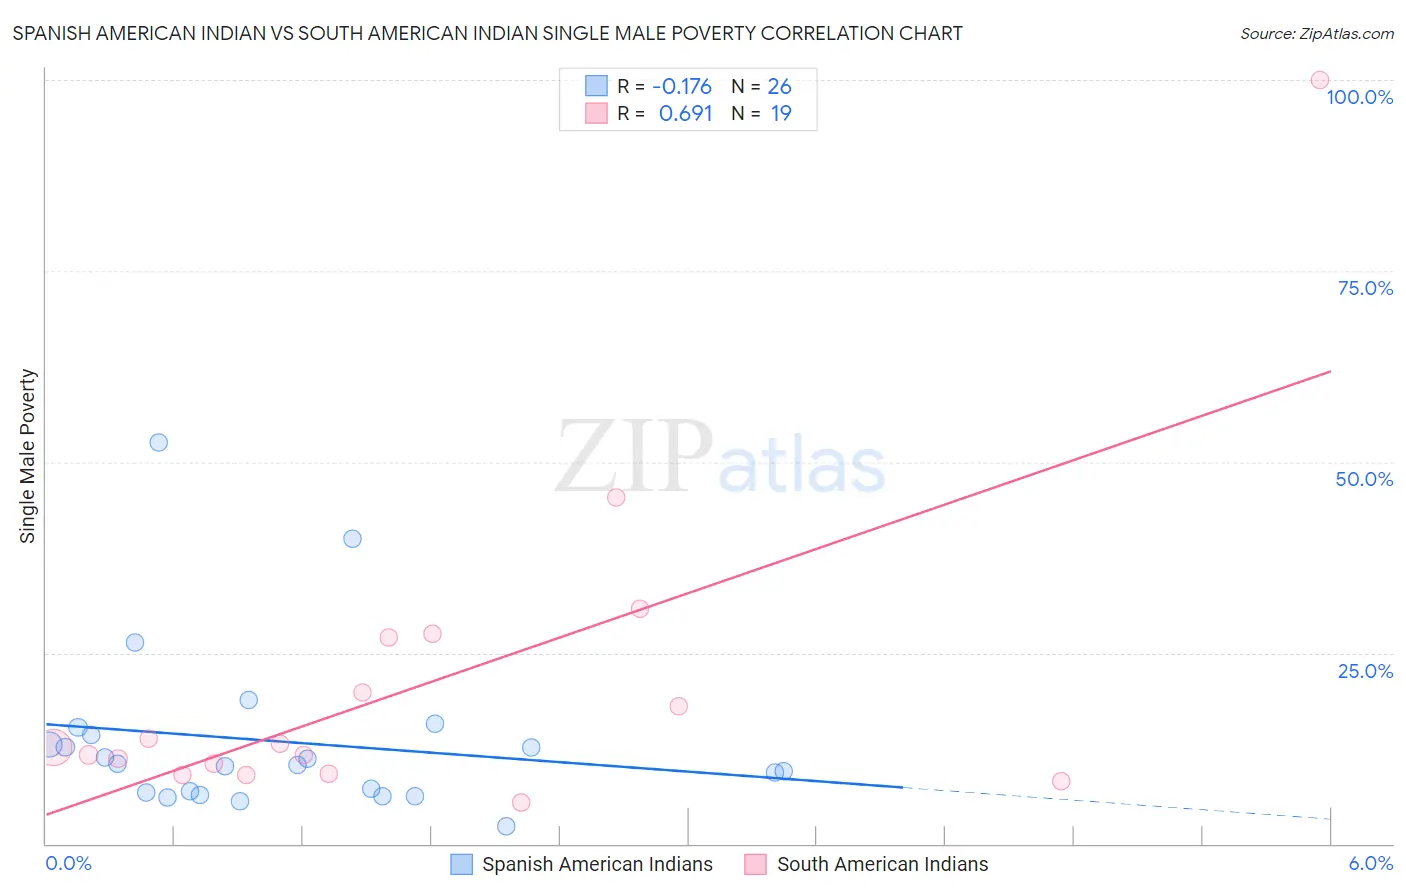 Spanish American Indian vs South American Indian Single Male Poverty